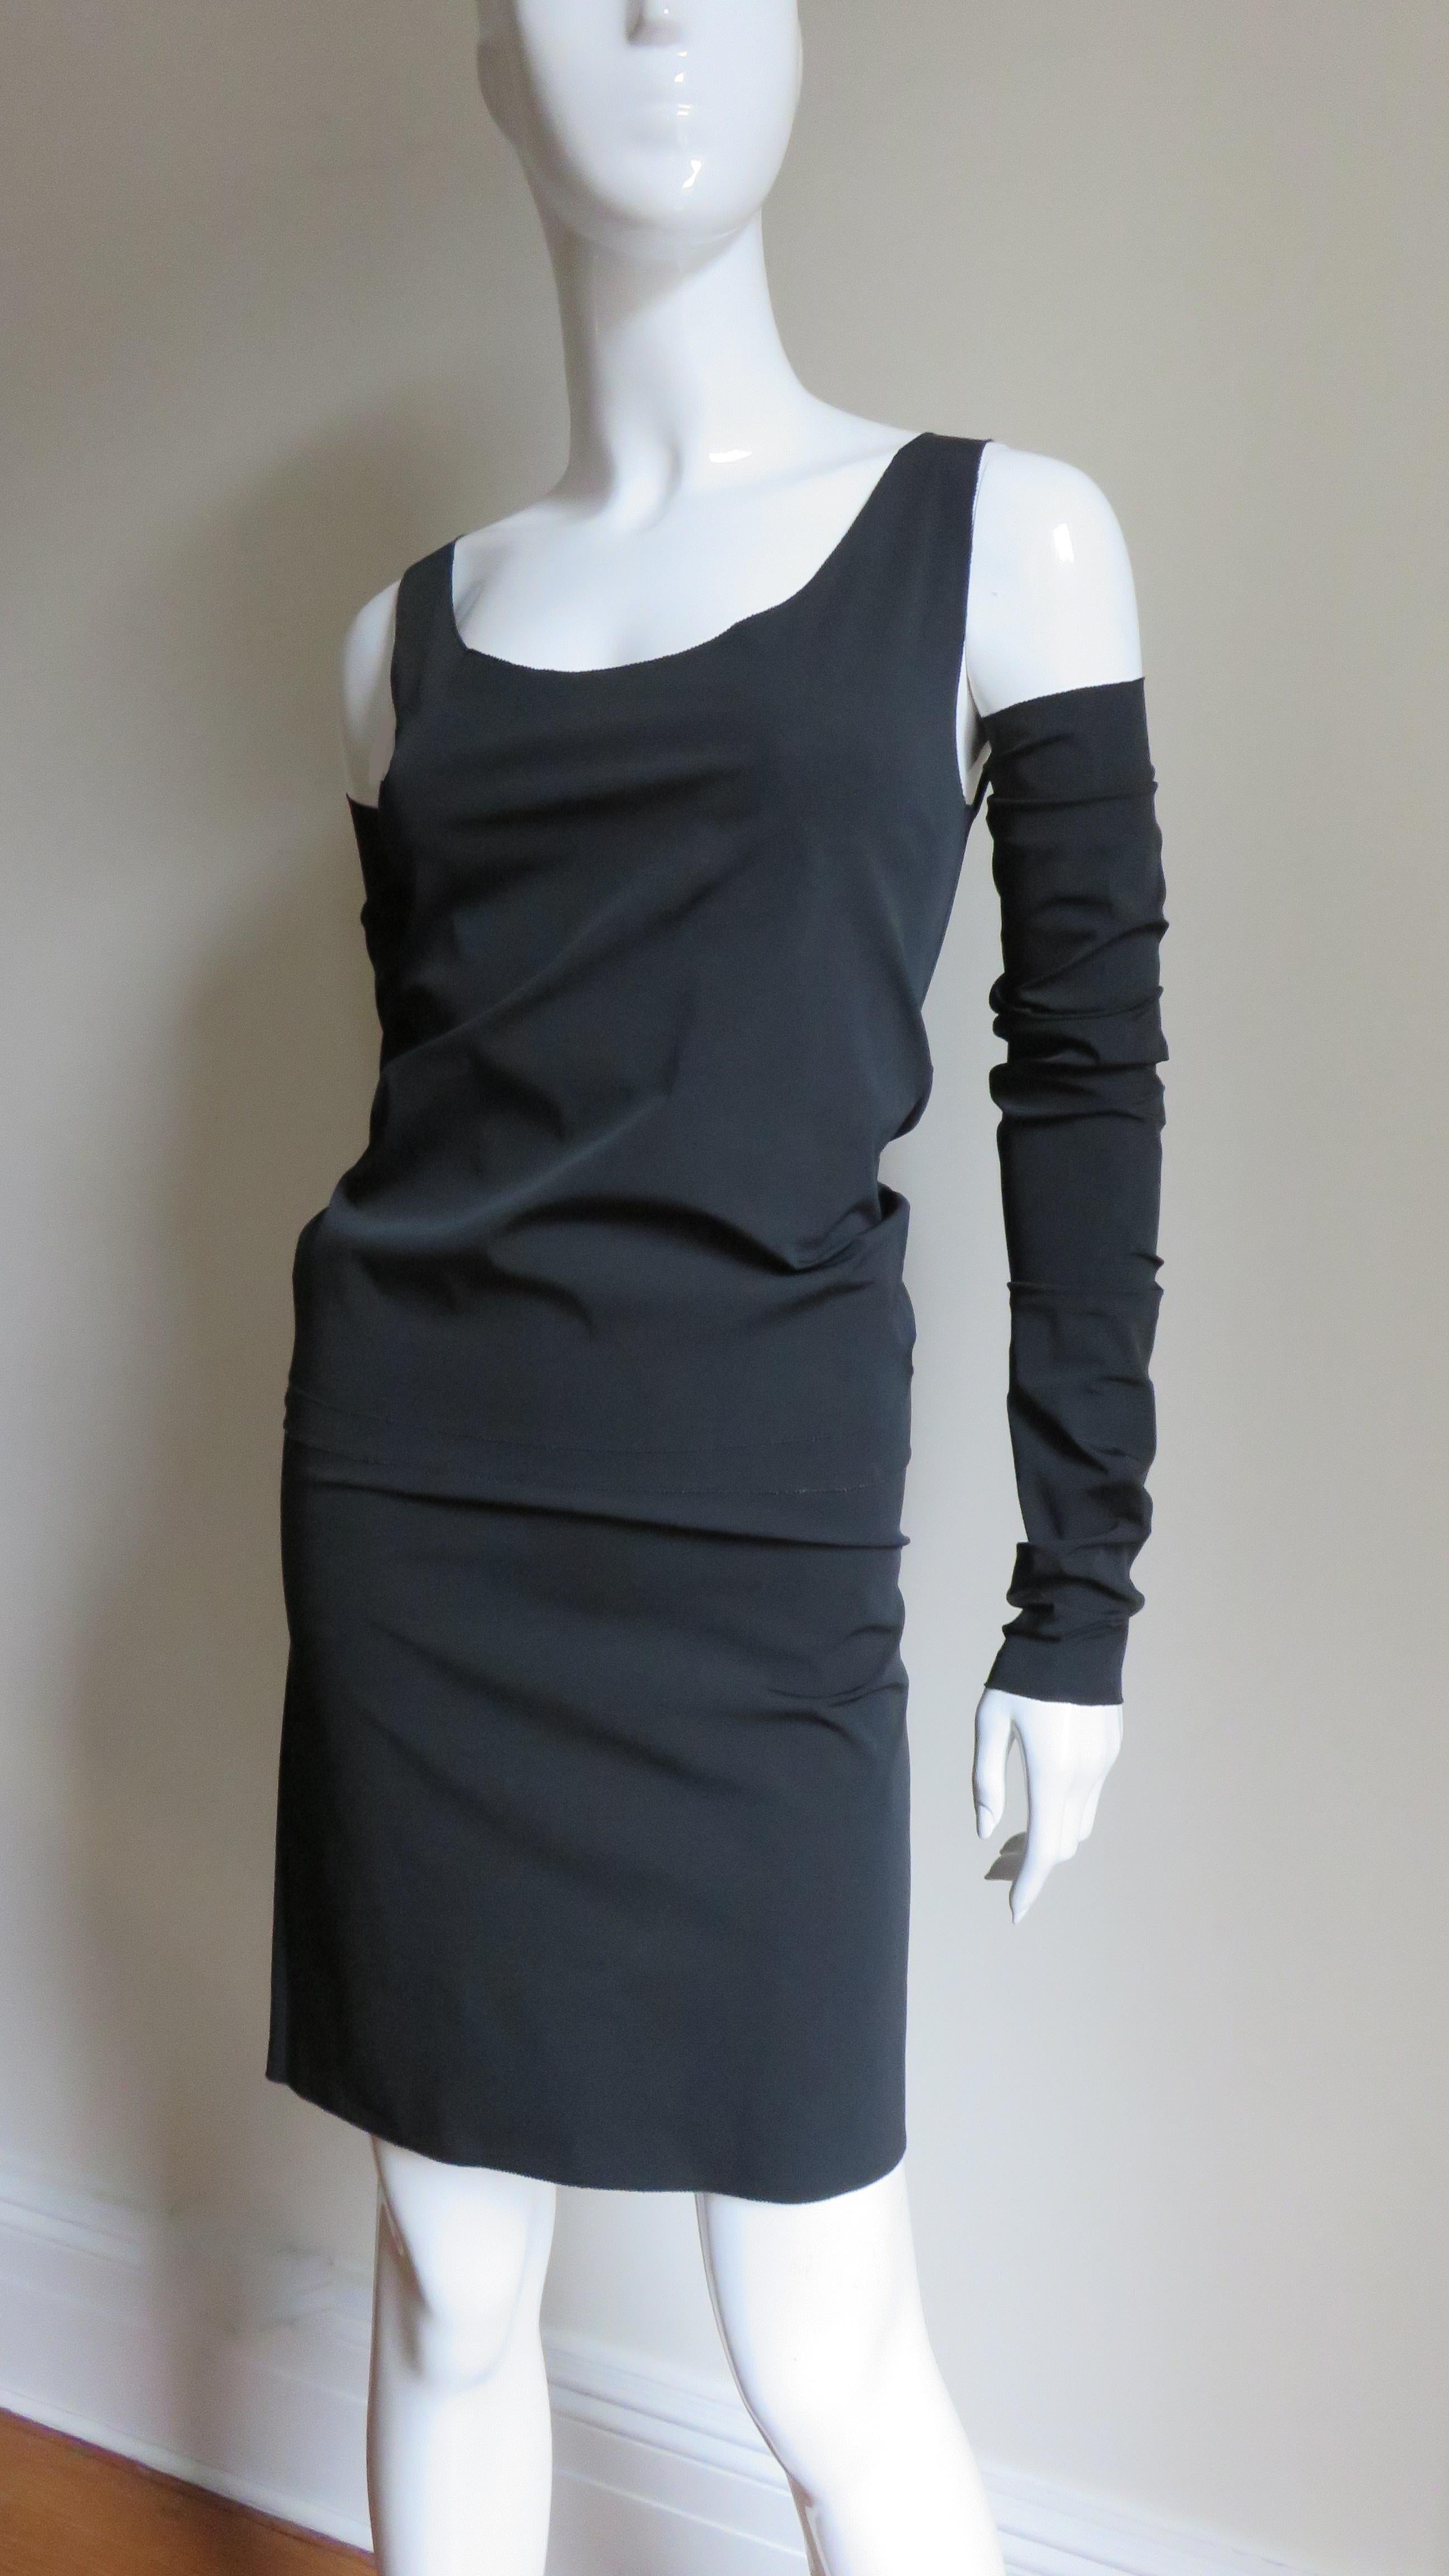 A fabulous 2 piece black top and skirt with separate sleeves from Jean Paul Gaultier.  The top is sleeveless with a scoop neckline and the skirt is straight.  The 2 separate long sleeves can be ruched on the arm.  All have stretch and slip on